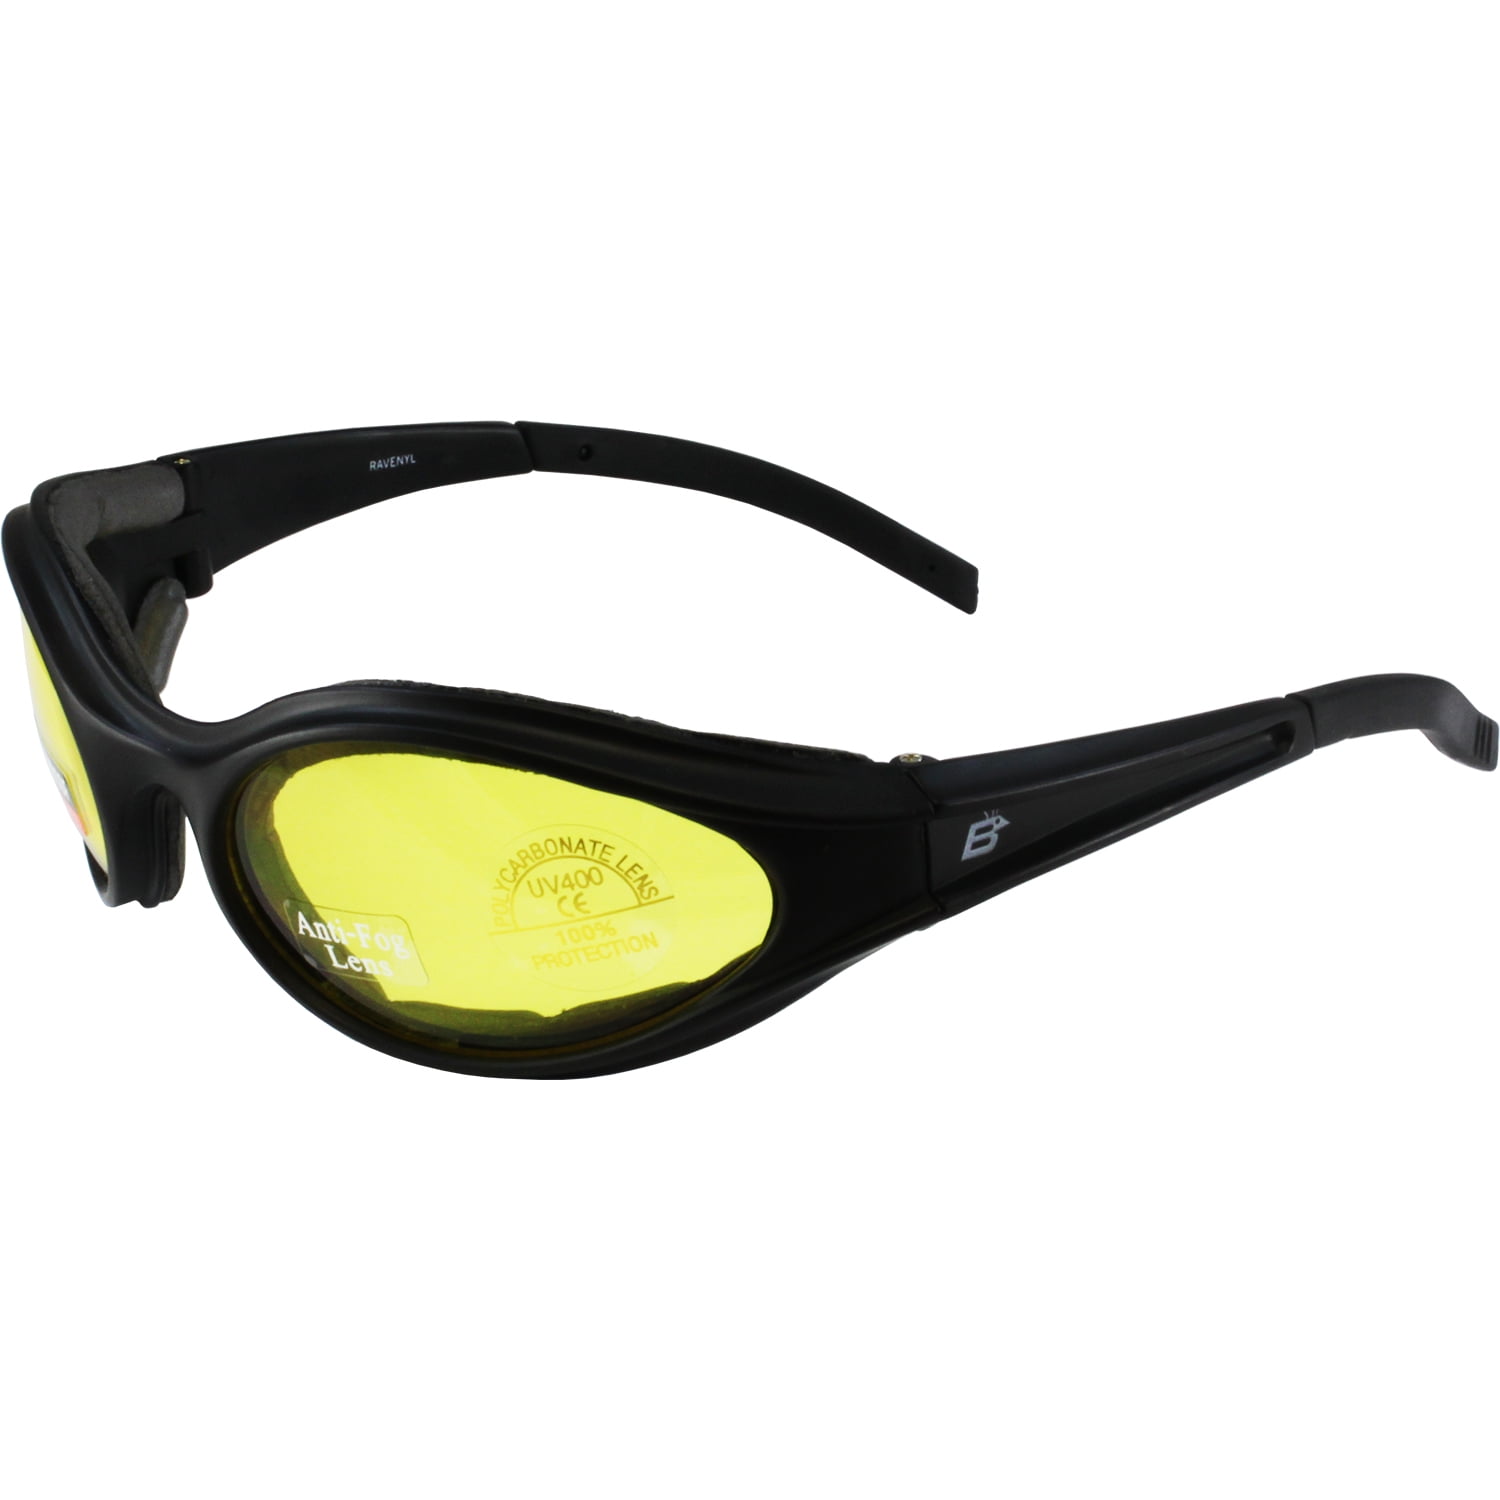 New Clear Motorcycle Anti-Fog Glasses/UV400 Sunglasses Free Pouch & Postage 